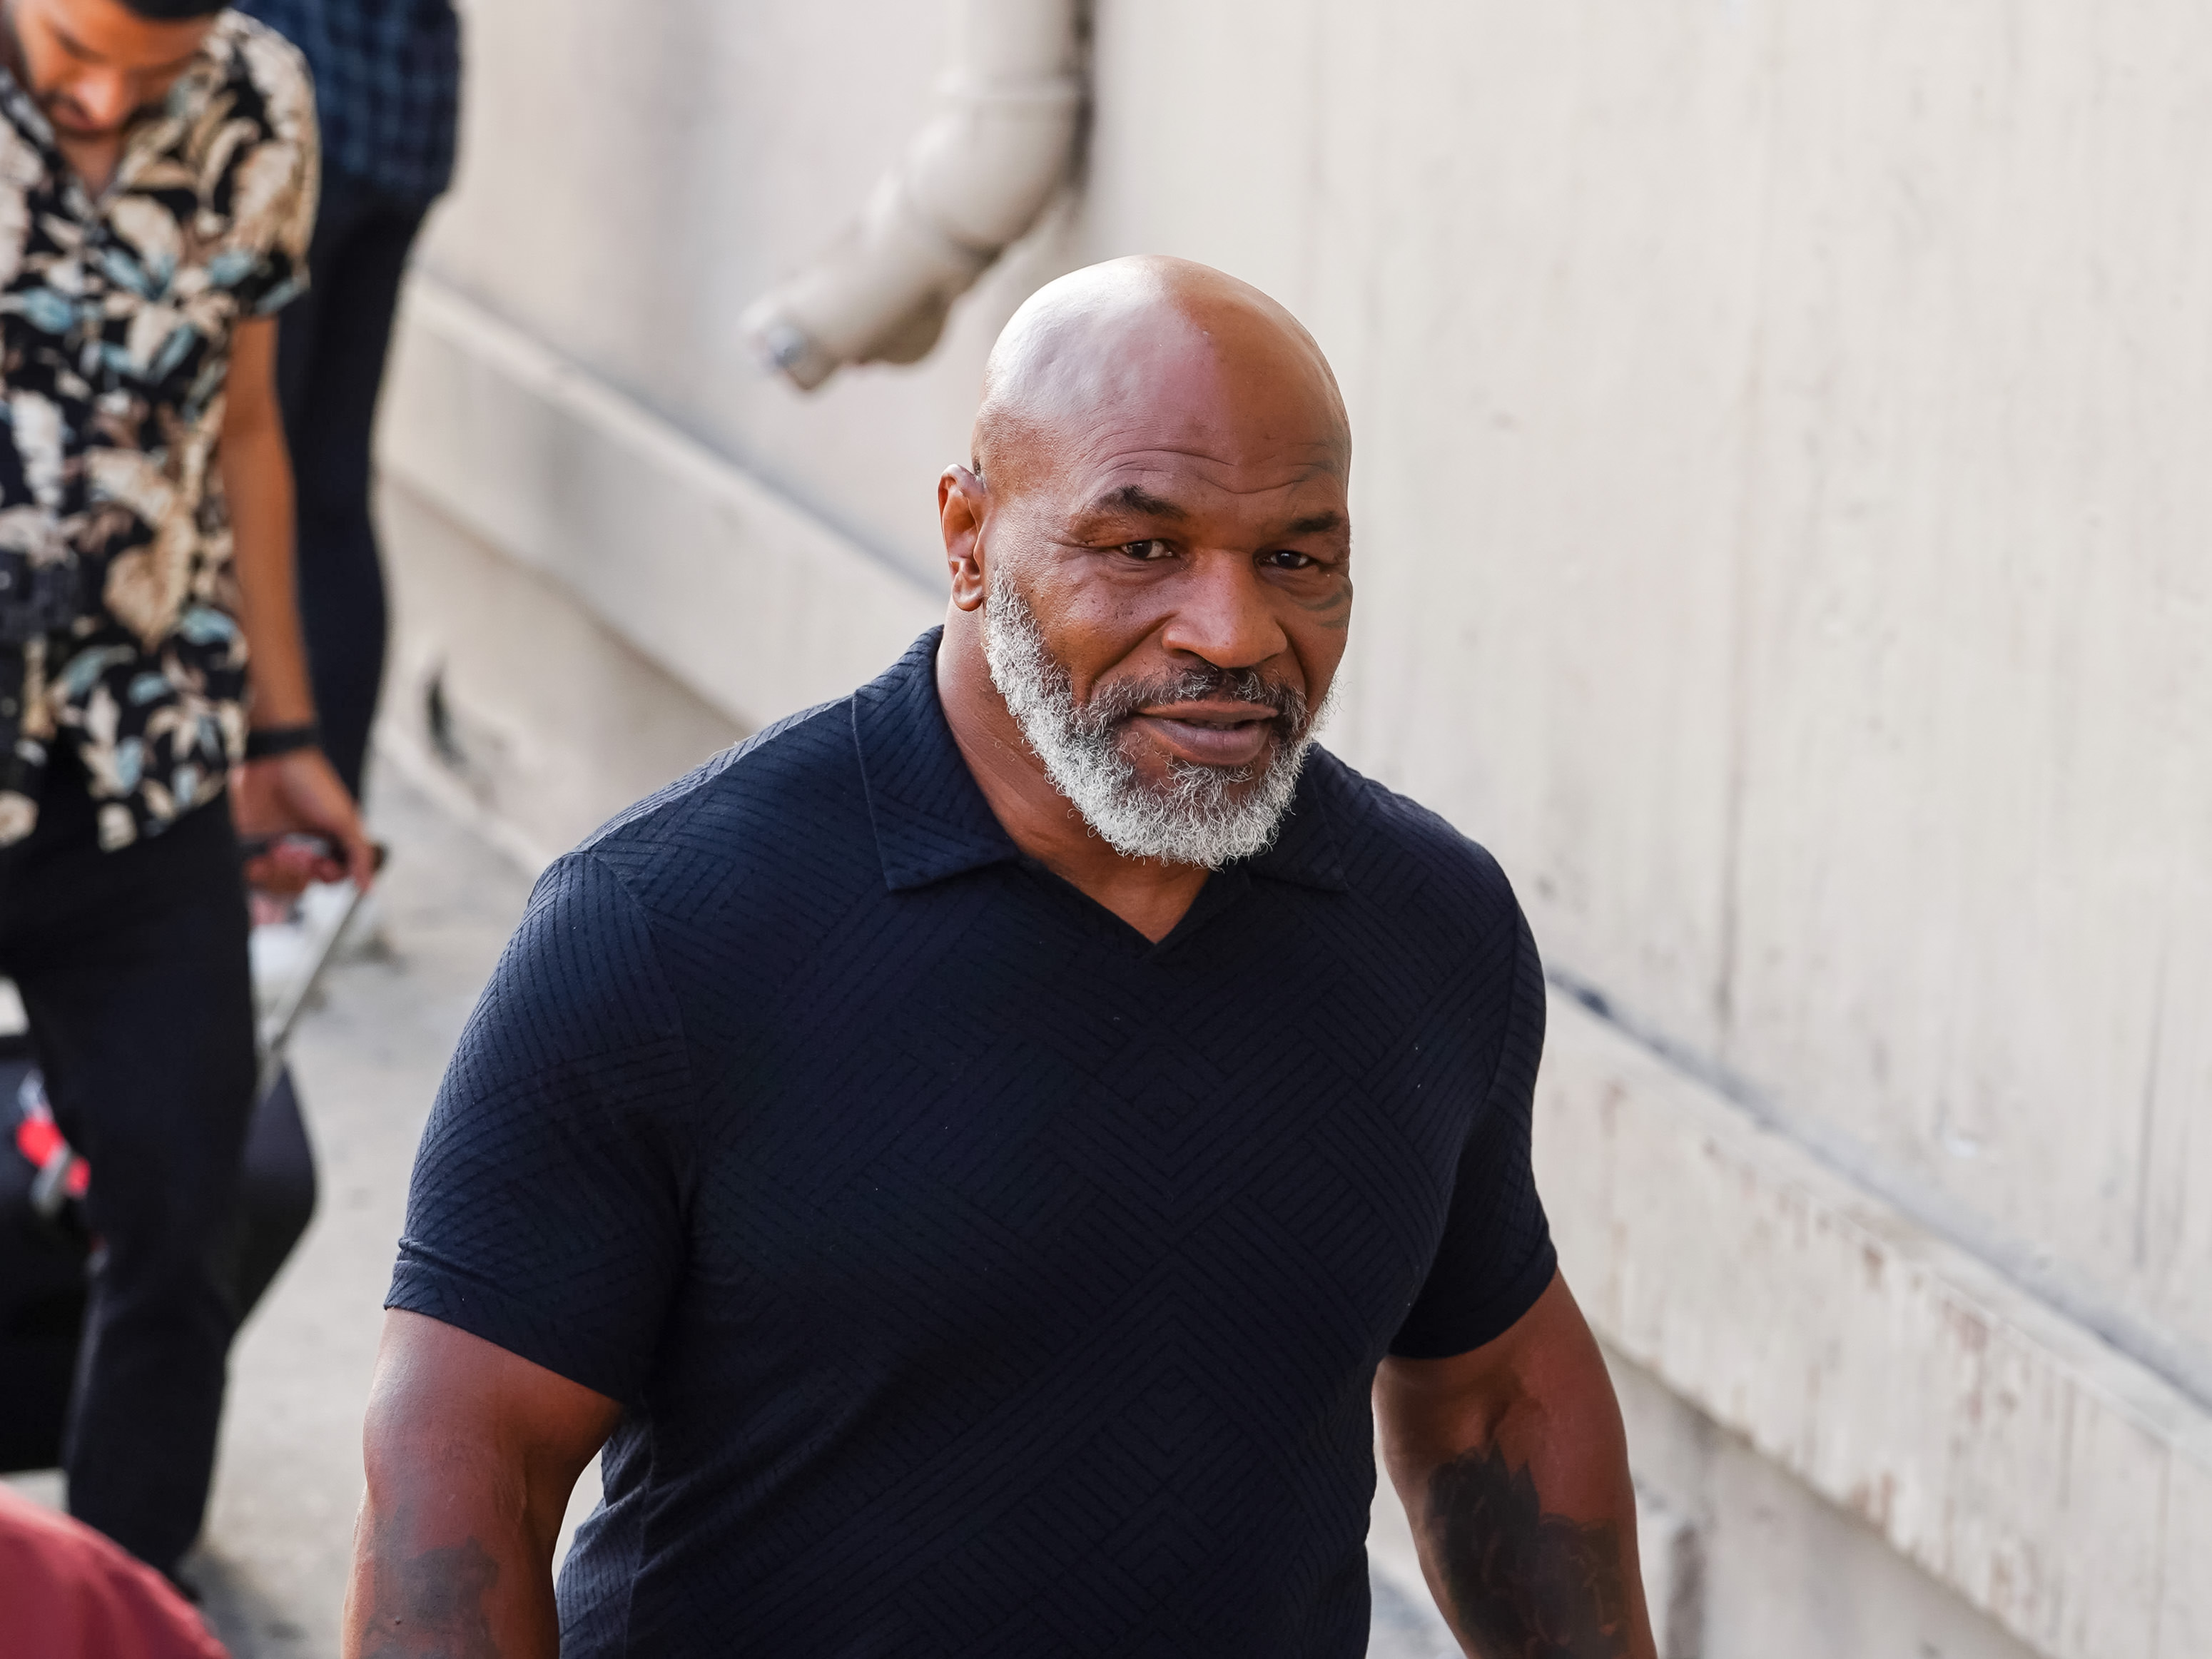 Mike Tyson and His Therapist Let It All Out  During Emotional Interview: ‘You’re a Scared Little Boy Sometimes’